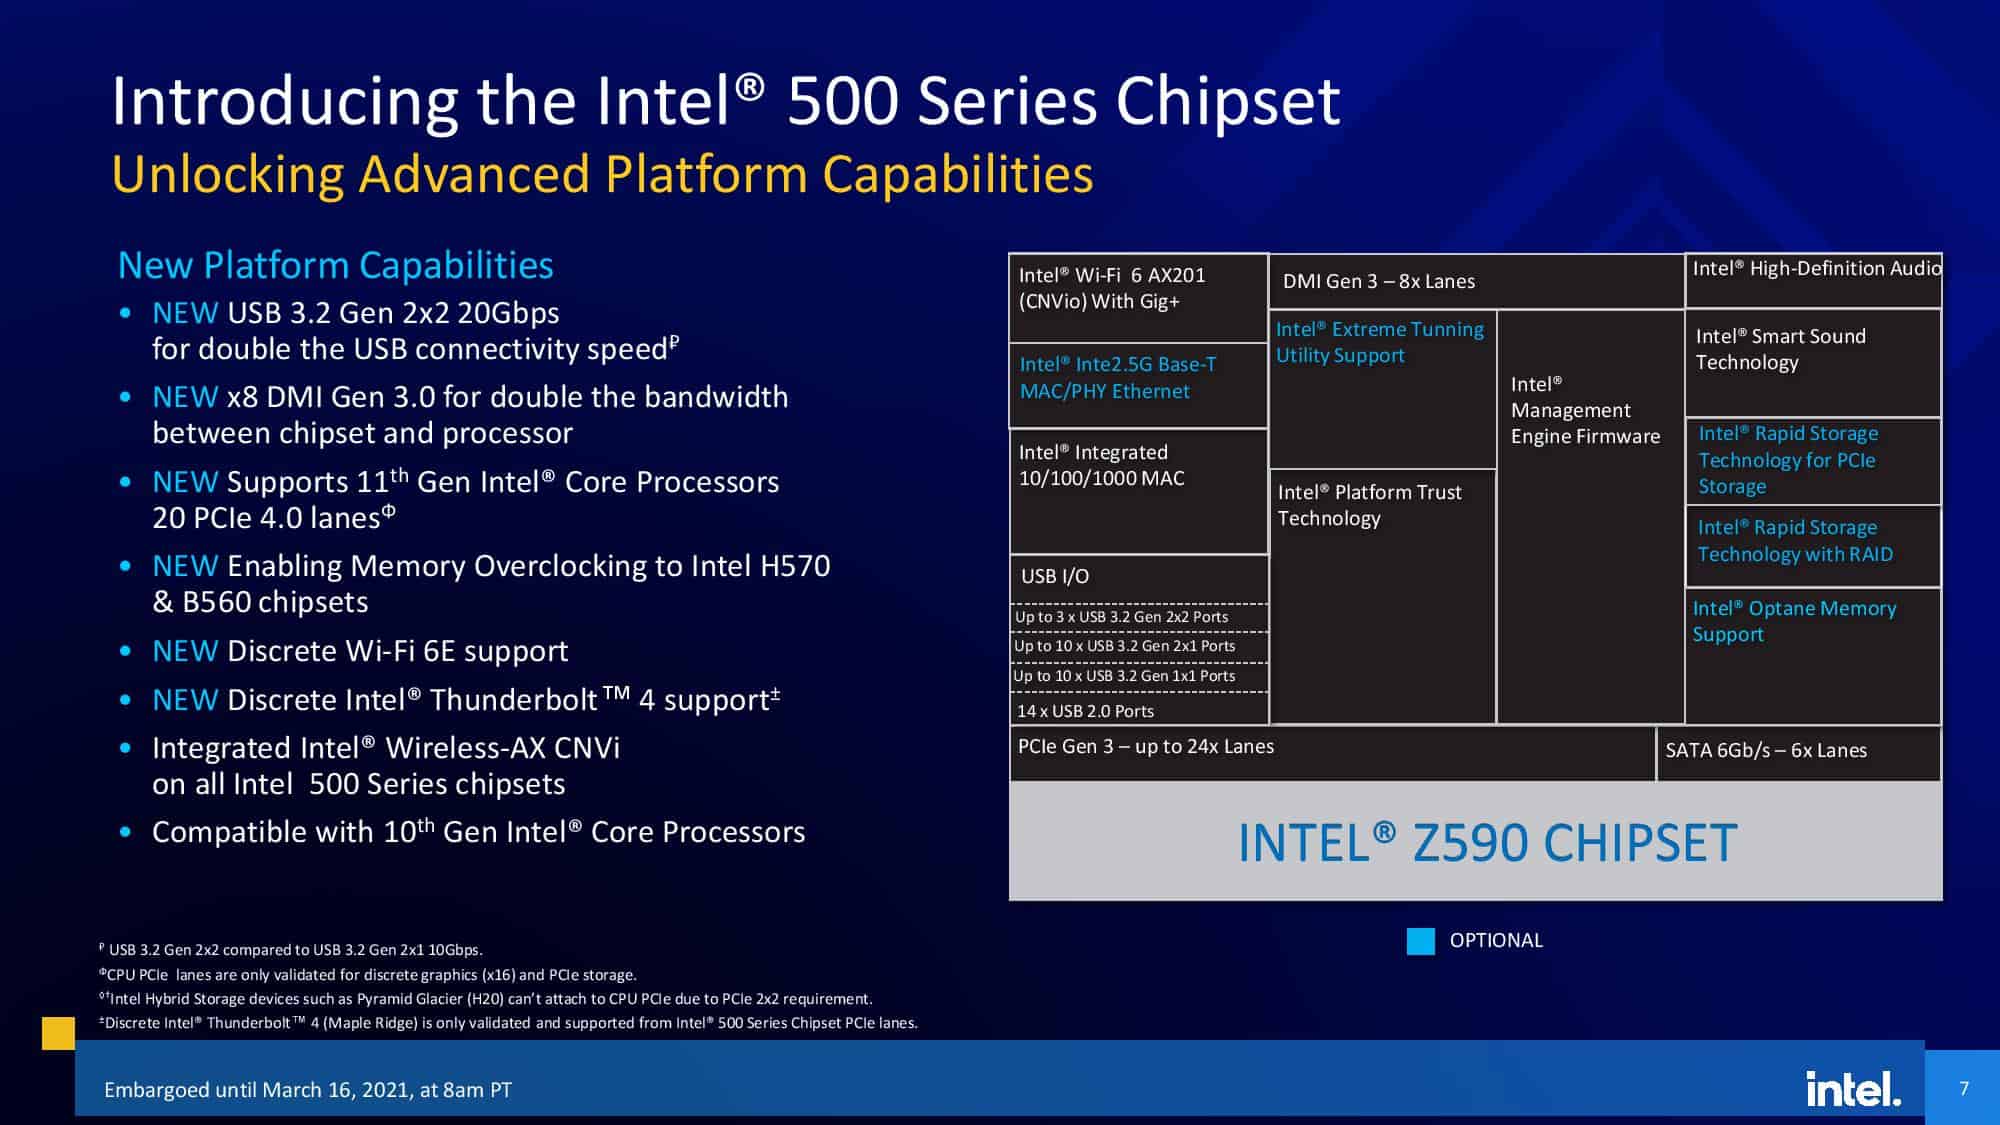 Intel's 500 Series Chipset Features